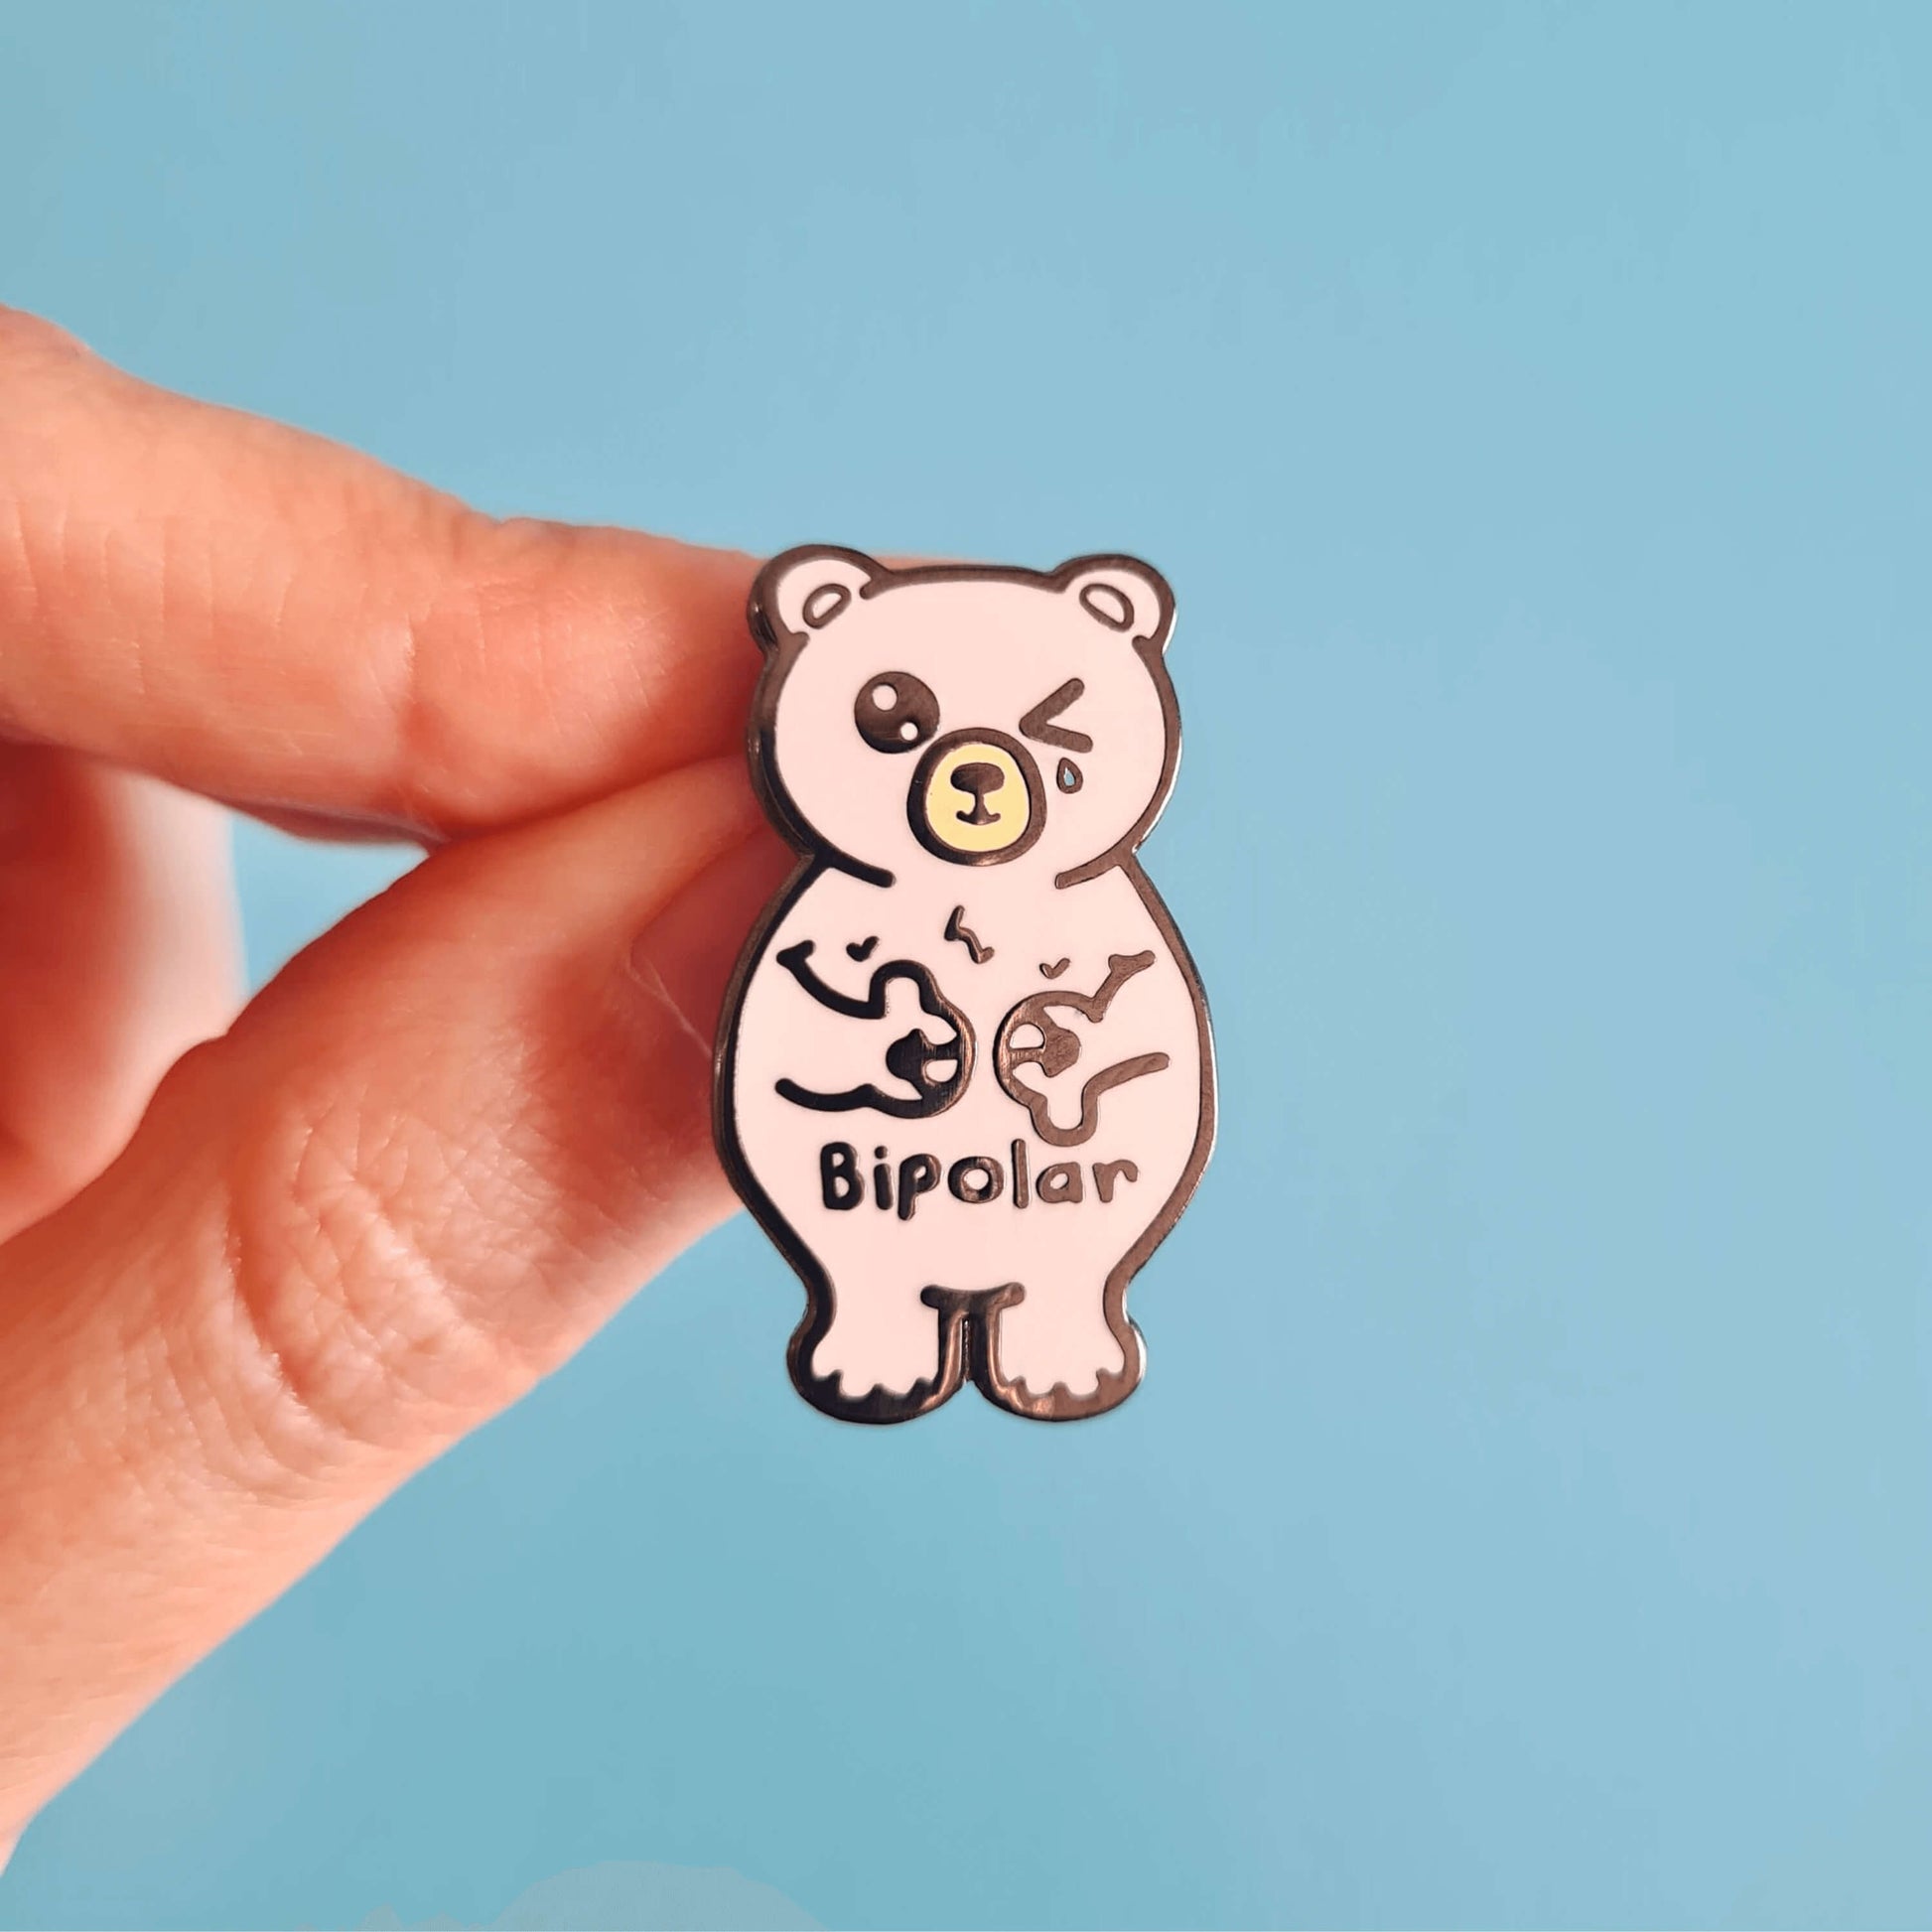 Bipolar Bear Enamel Pin - Bipolar being held over a blue background. The pin is a white polar bear with one eye closed crying whilst smiling clutching its chest, across its tummy reads bipolar. The pun pin is raising awareness for bipolar disorder.